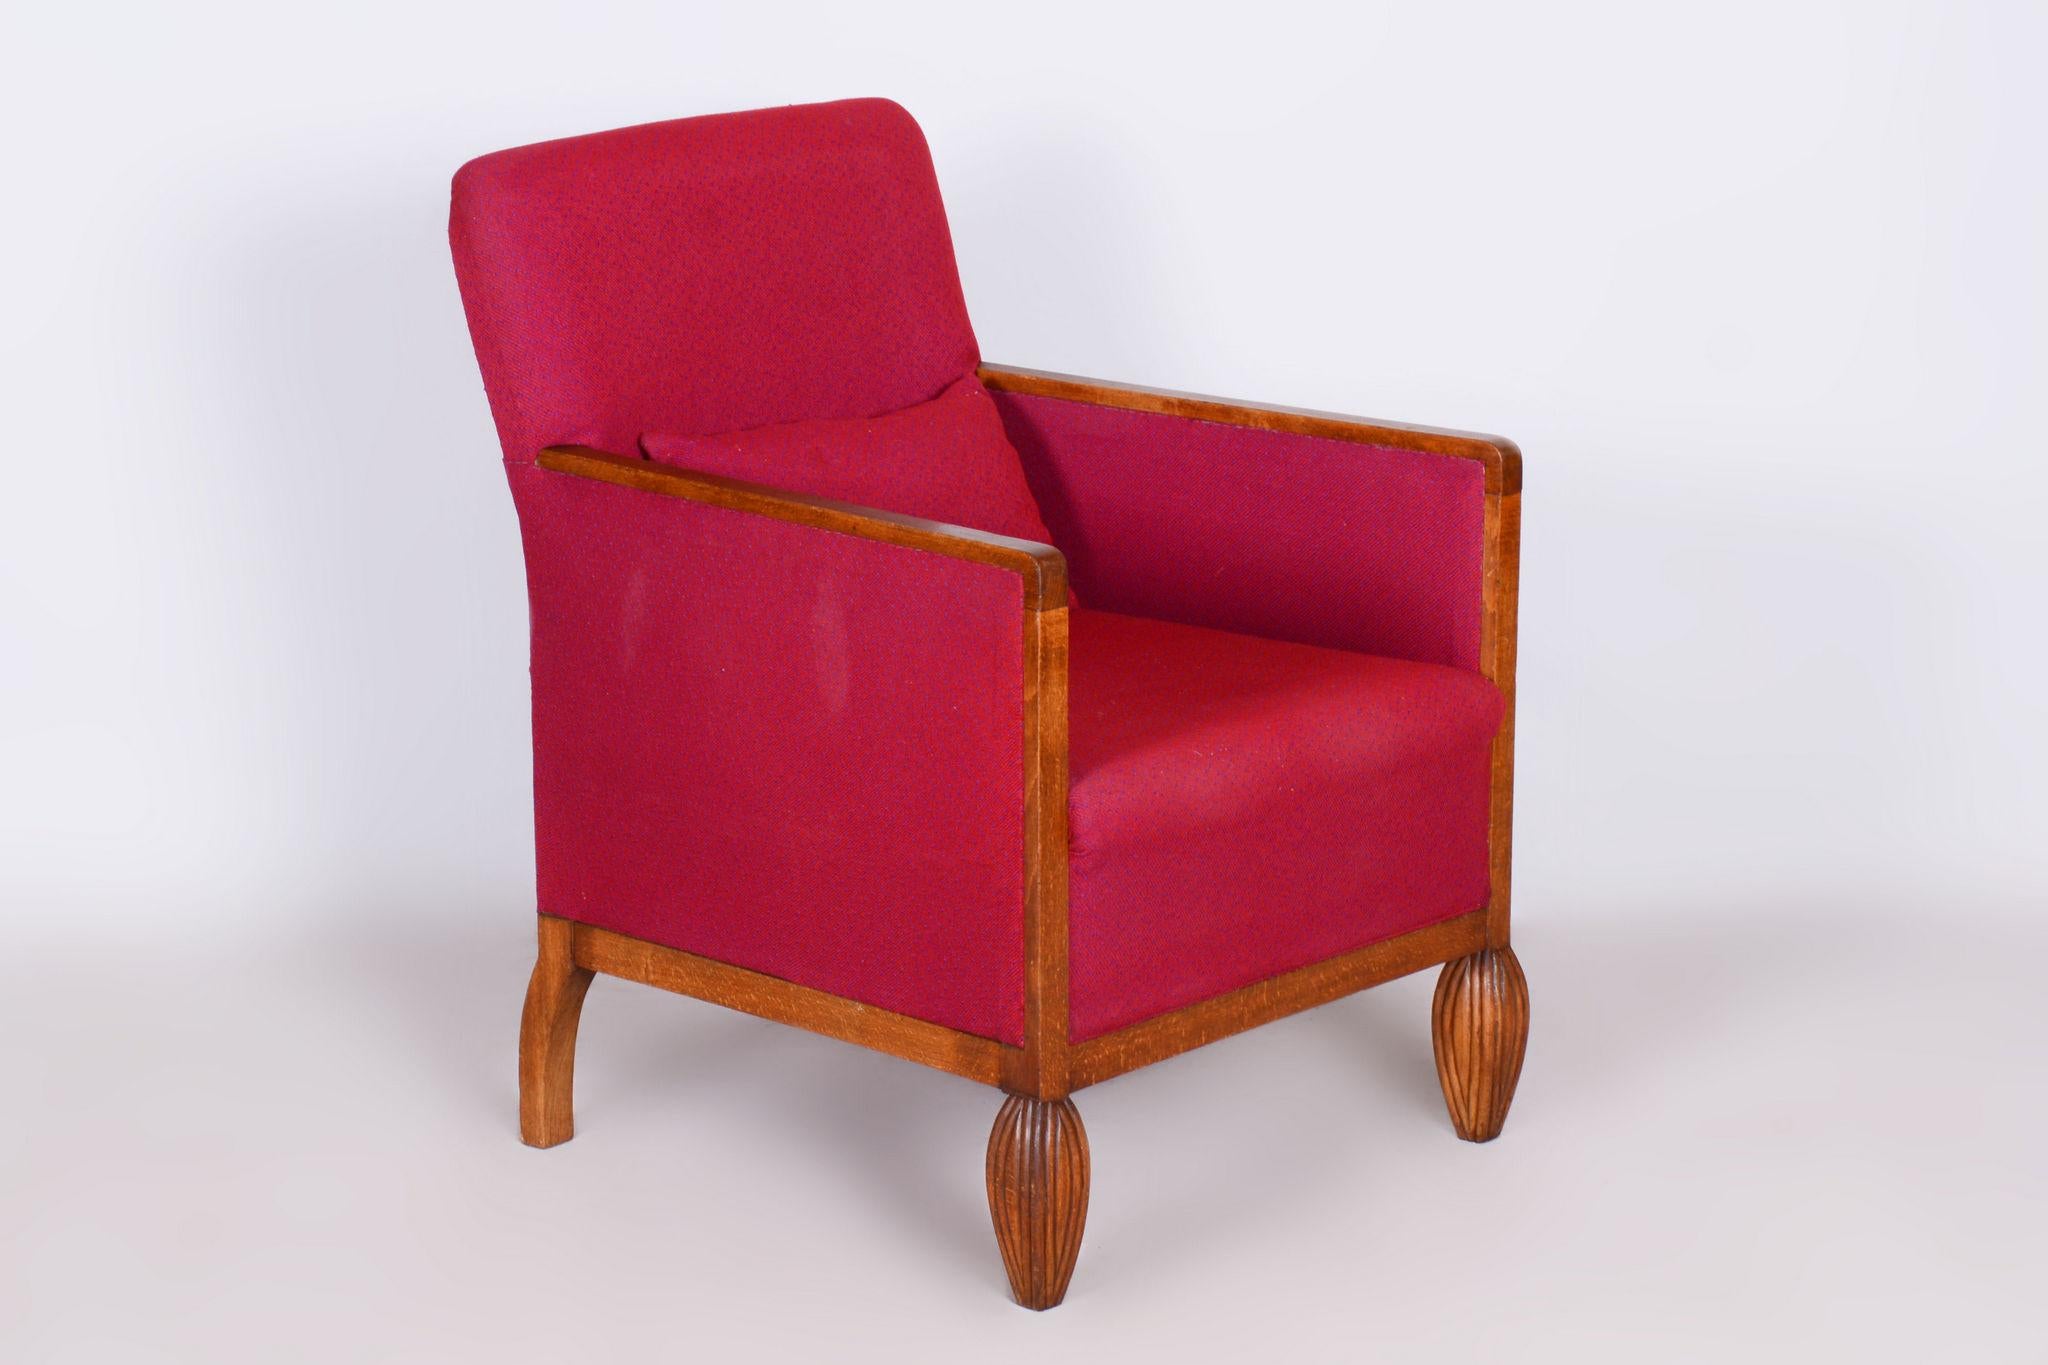 Restored Art Deco Armchair. 

Source: France
Period: 1930-1939
Material: Beech, Original upholstery

In pristine original condition, the upholstery has been professionally cleaned, and its polish revived by our refurbishing team in Czechia.